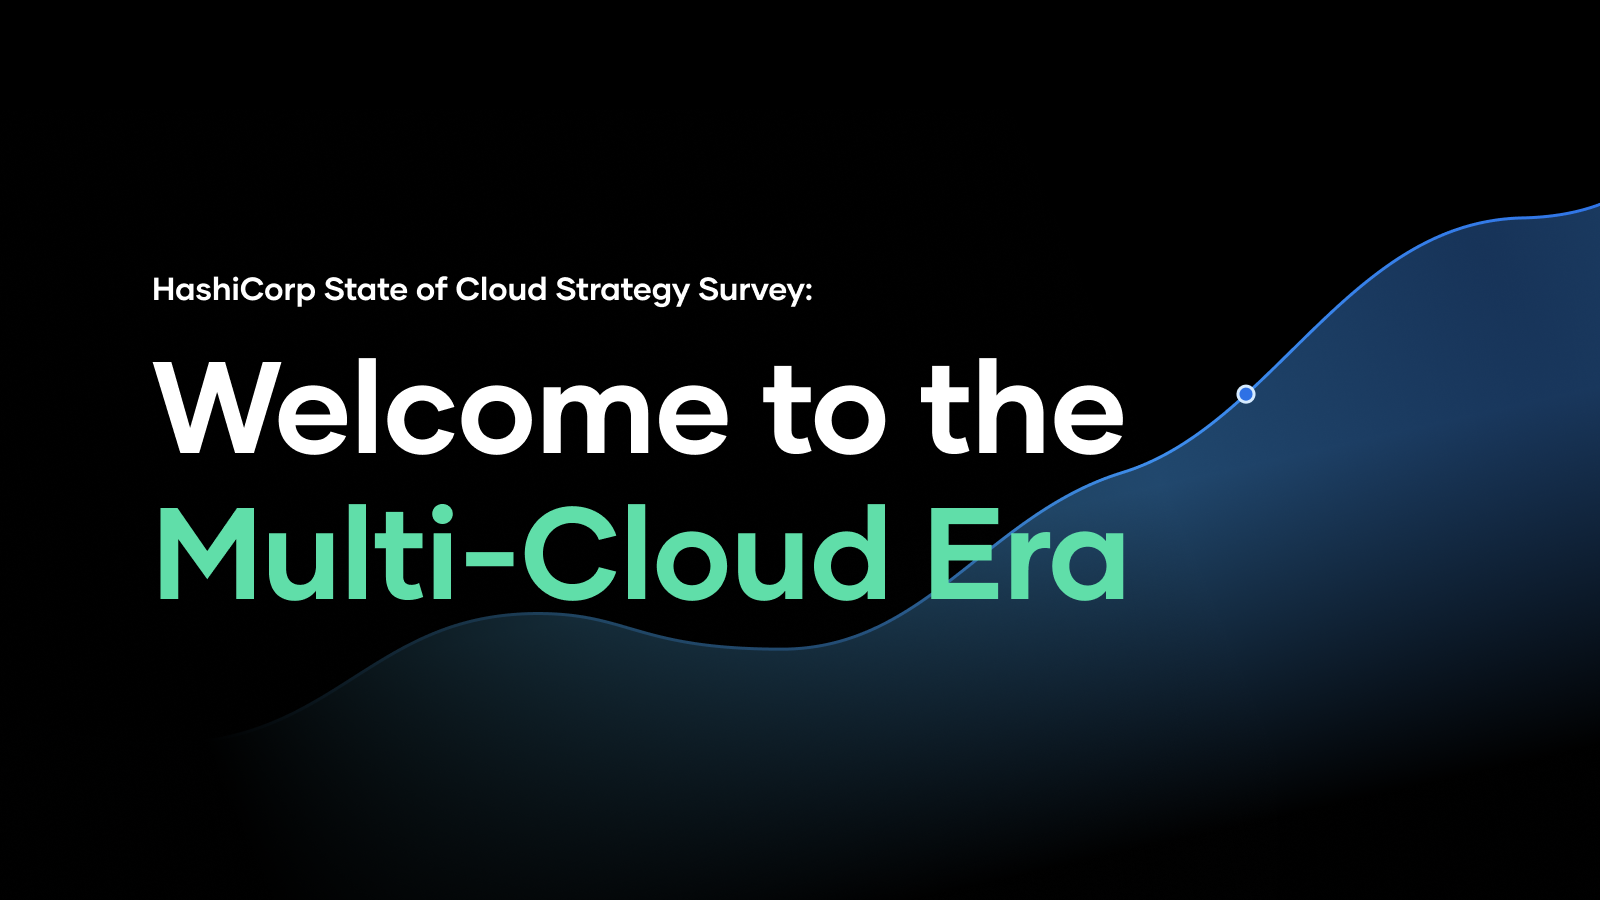 HashiCorp State of Cloud Strategy Survey: Welcome to the Multi-Cloud Era